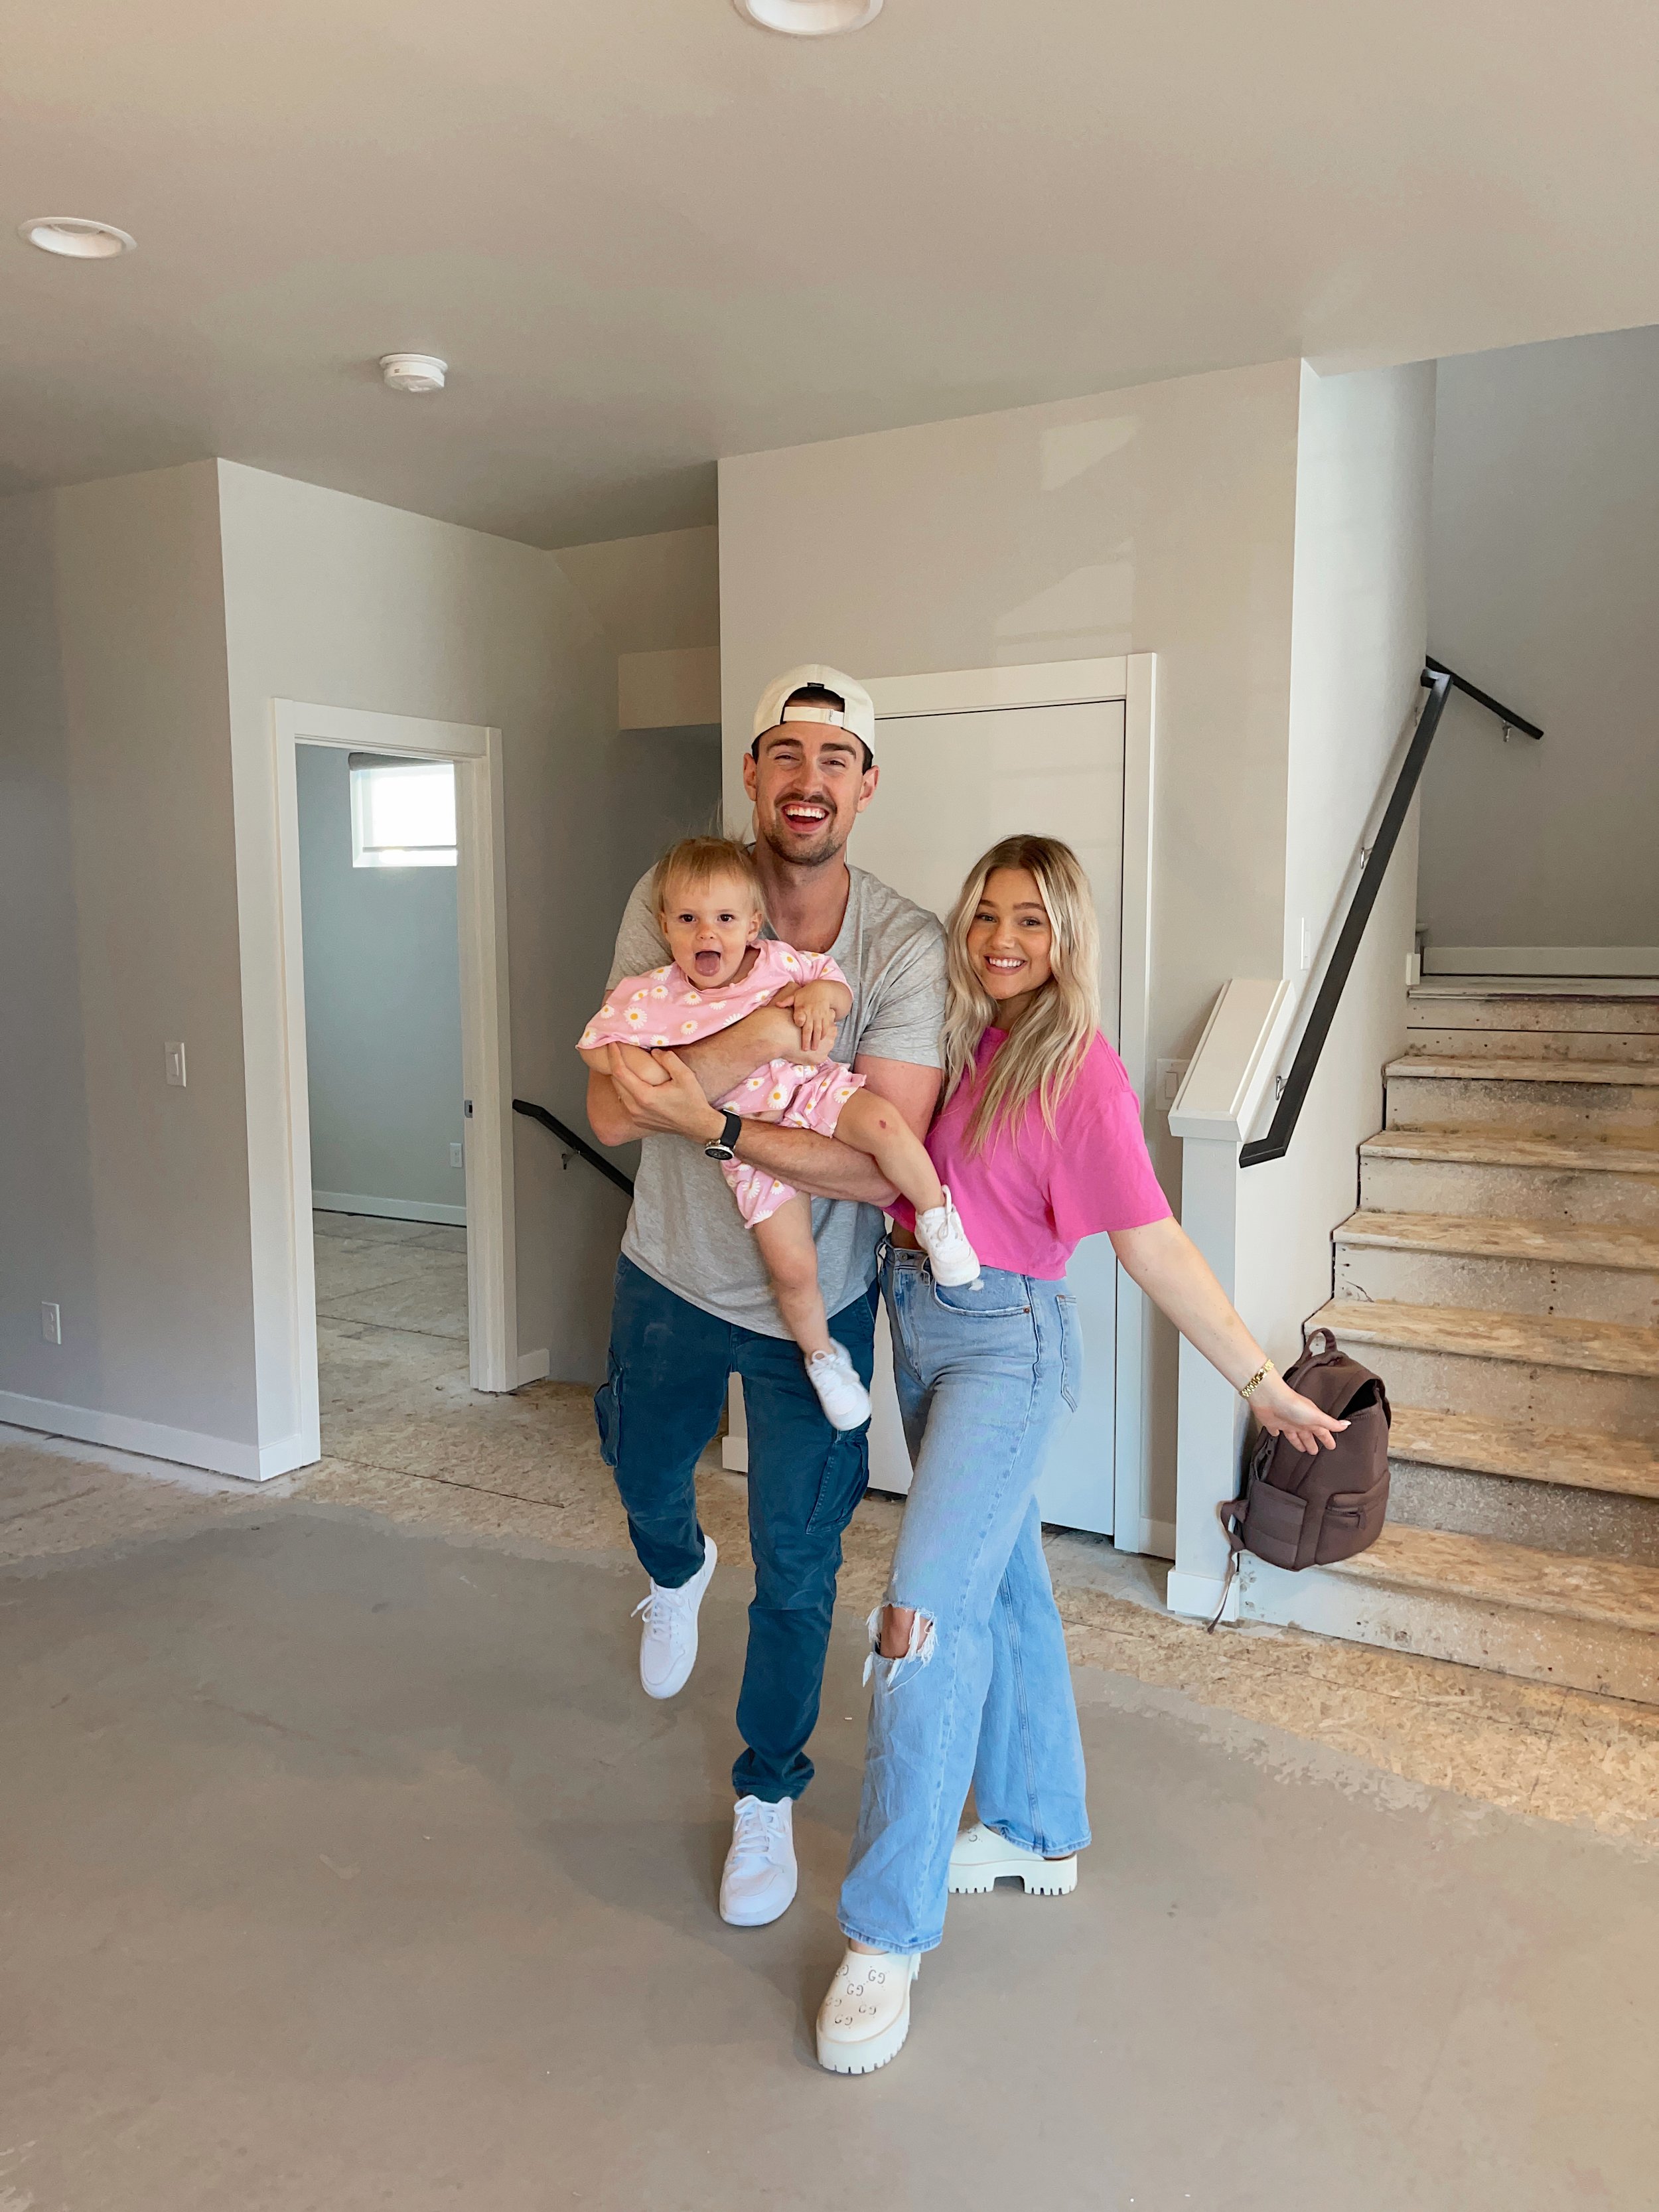 We Bought Our First House! - Bre Sheppard .JPG